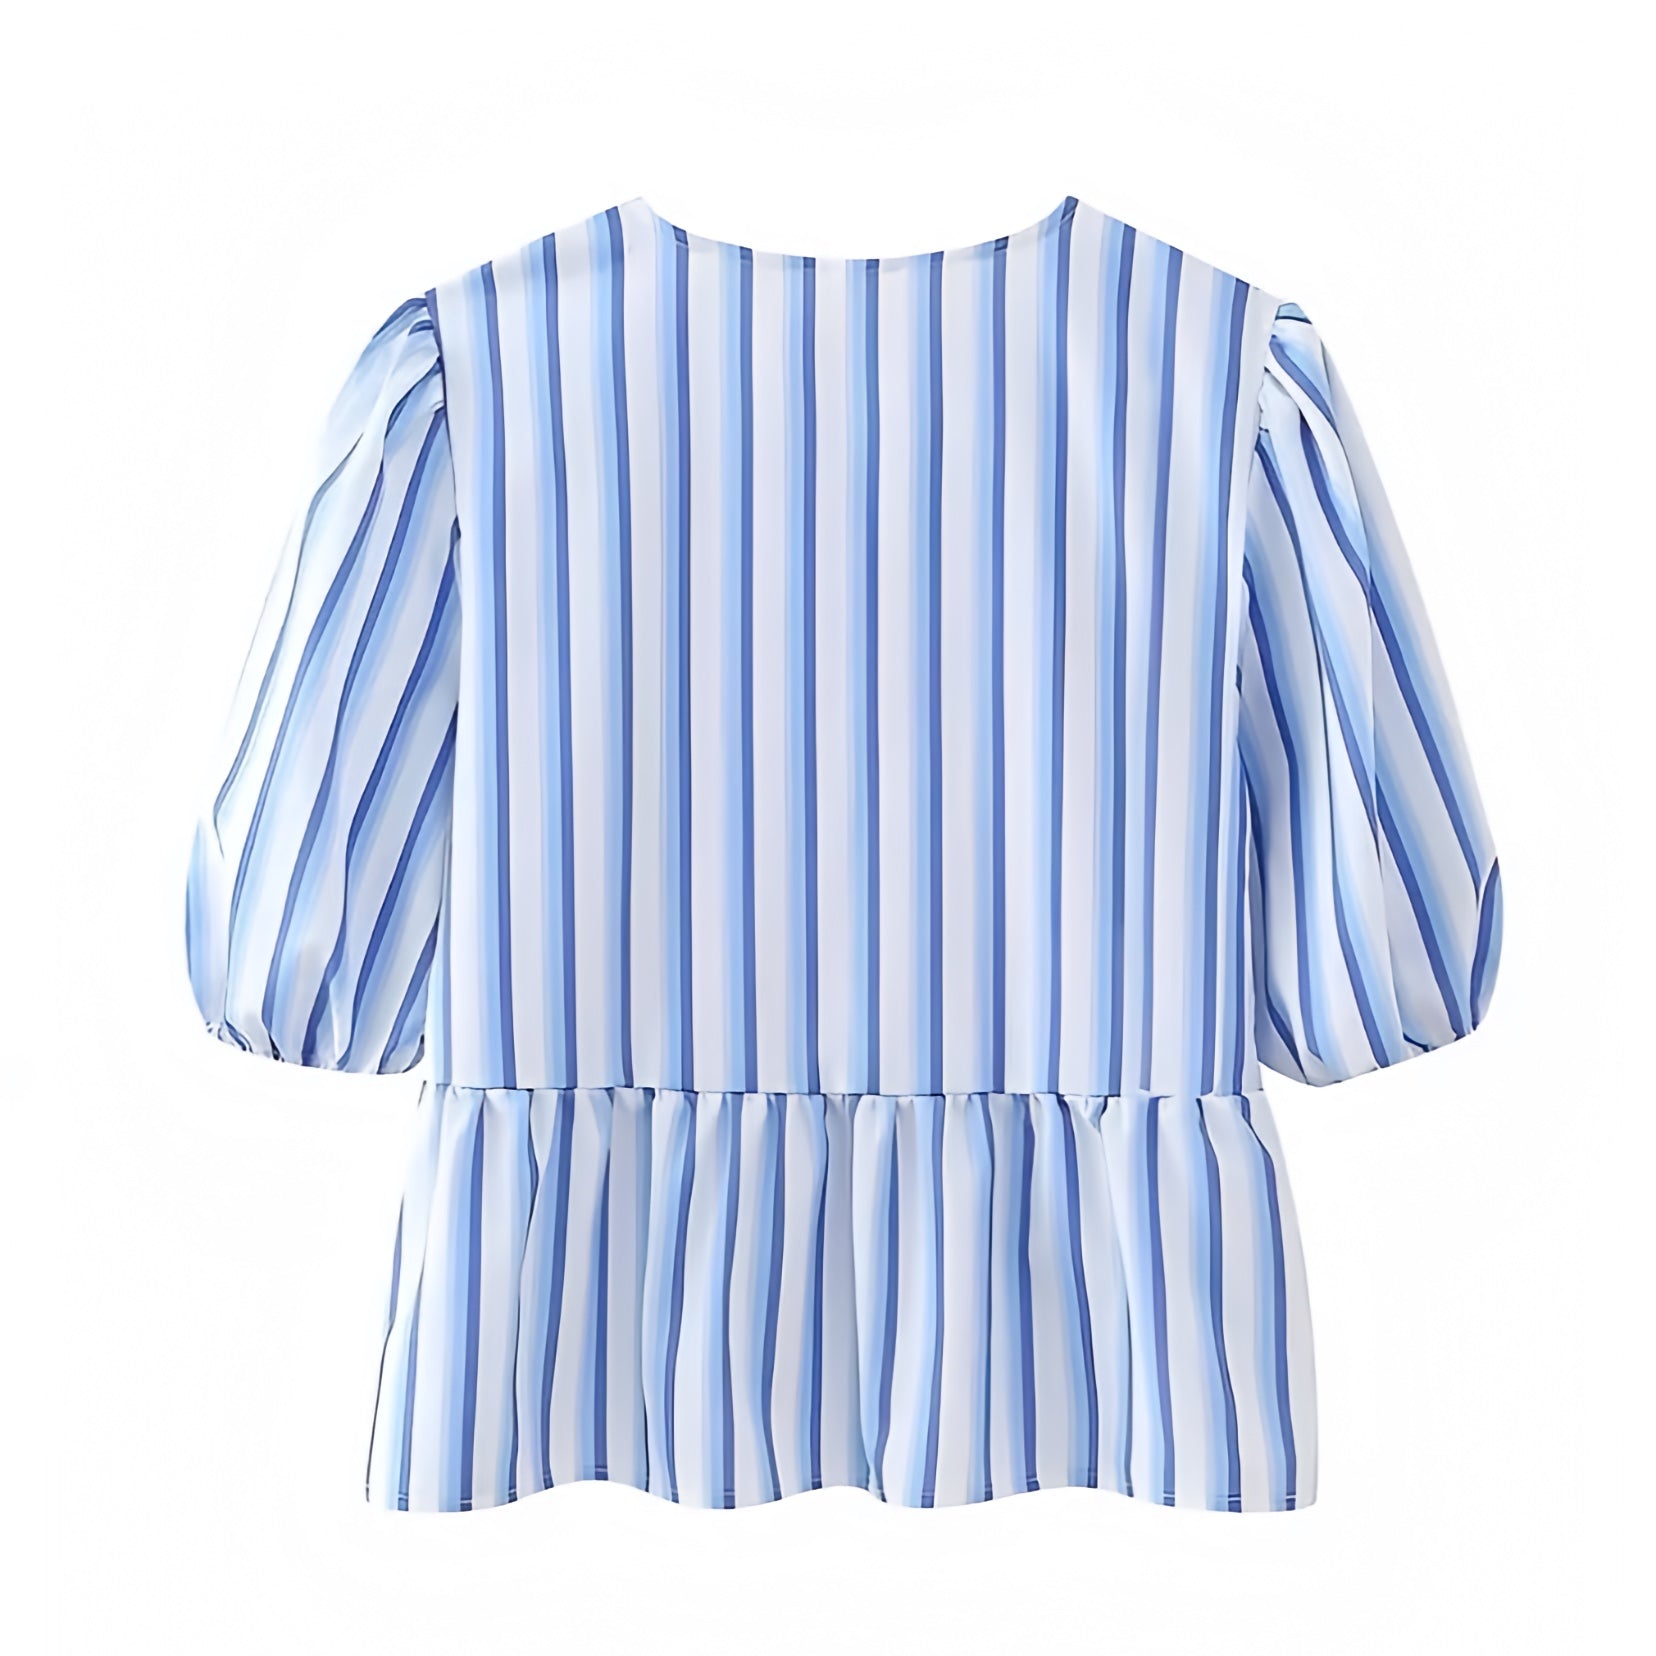 light-blue-and-white-striped-seersucker-pinstriped-multi-color-patterned-bow-lace-up-v-neck-short-puff-sleeve-camisole-crop-top-blouse-women-ladies-chic-trendy-spring-2024-summer-elegant-casual-feminine-classy-preppy-style-coastal-granddaughter-beach-wear-european-nautical-seaside-vacation-shirt-zara-revolve